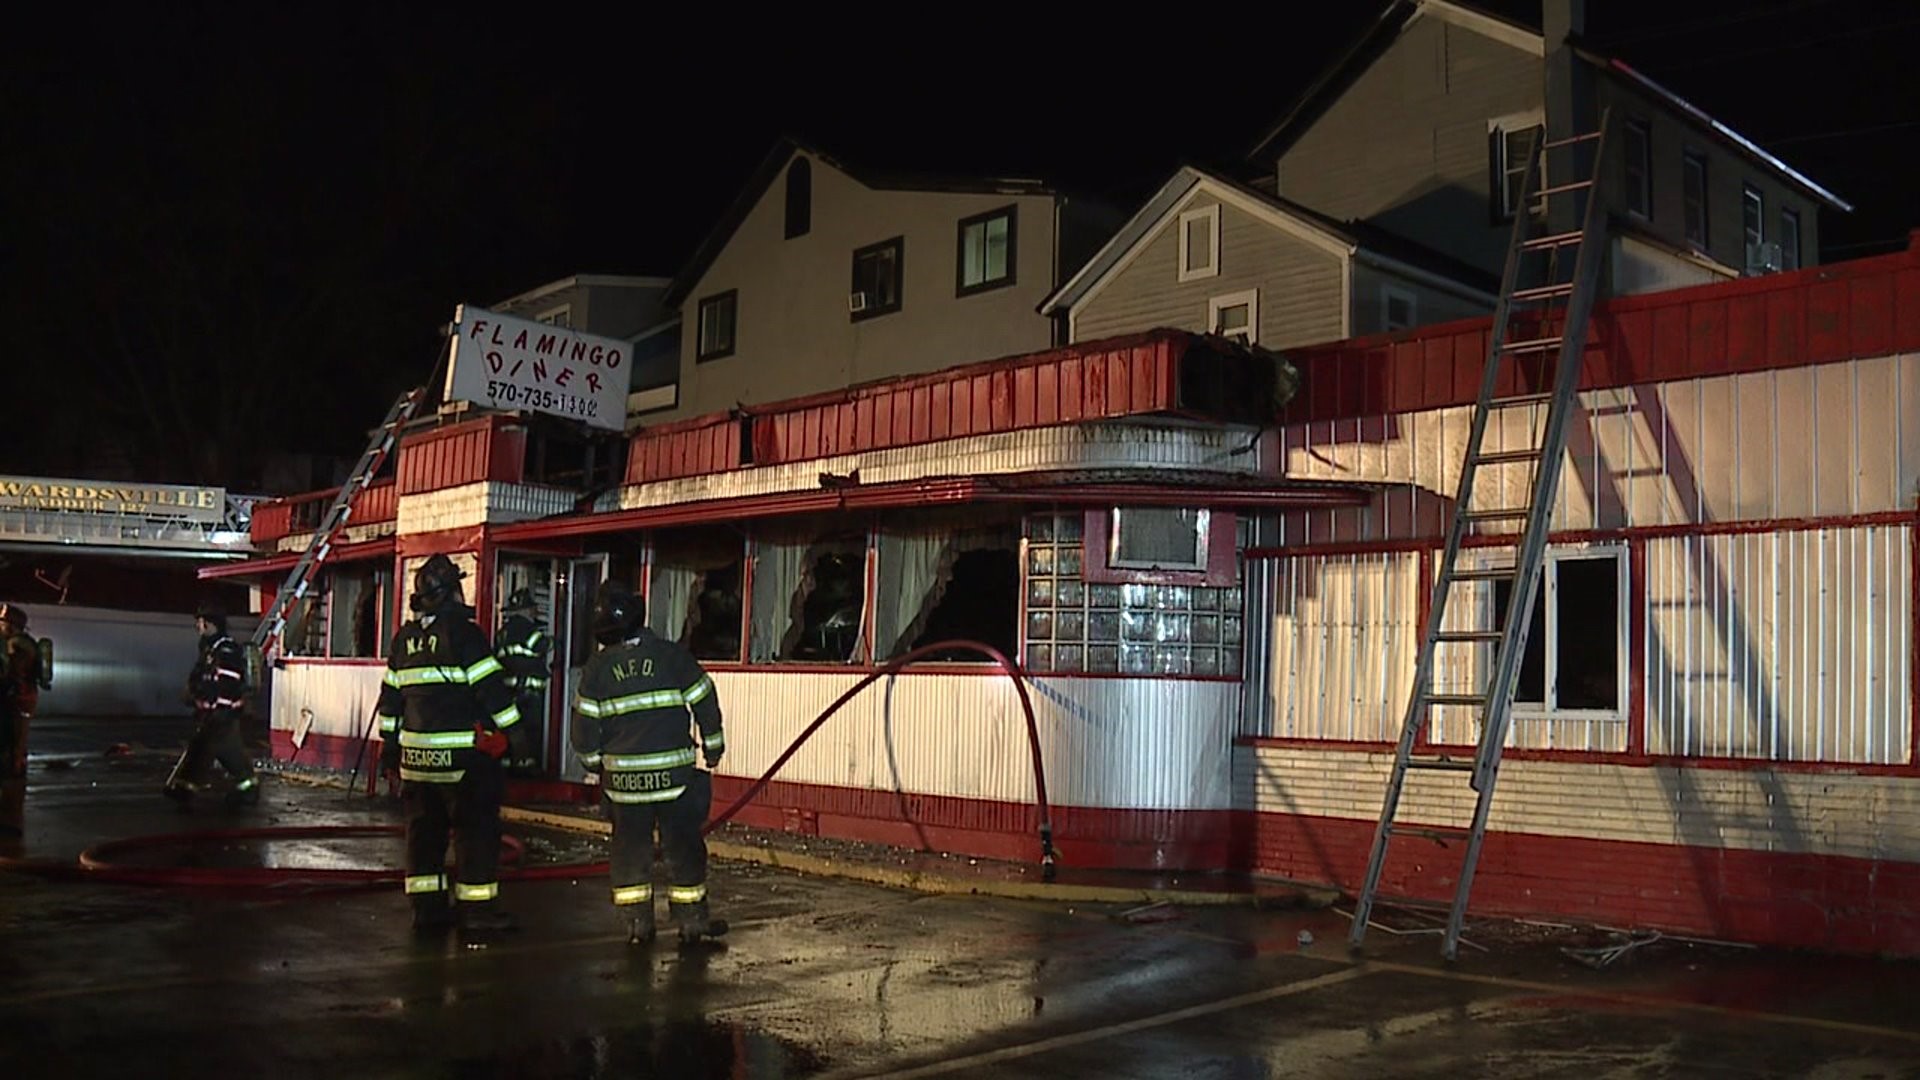 Fire Guts Diner in Luzerne County